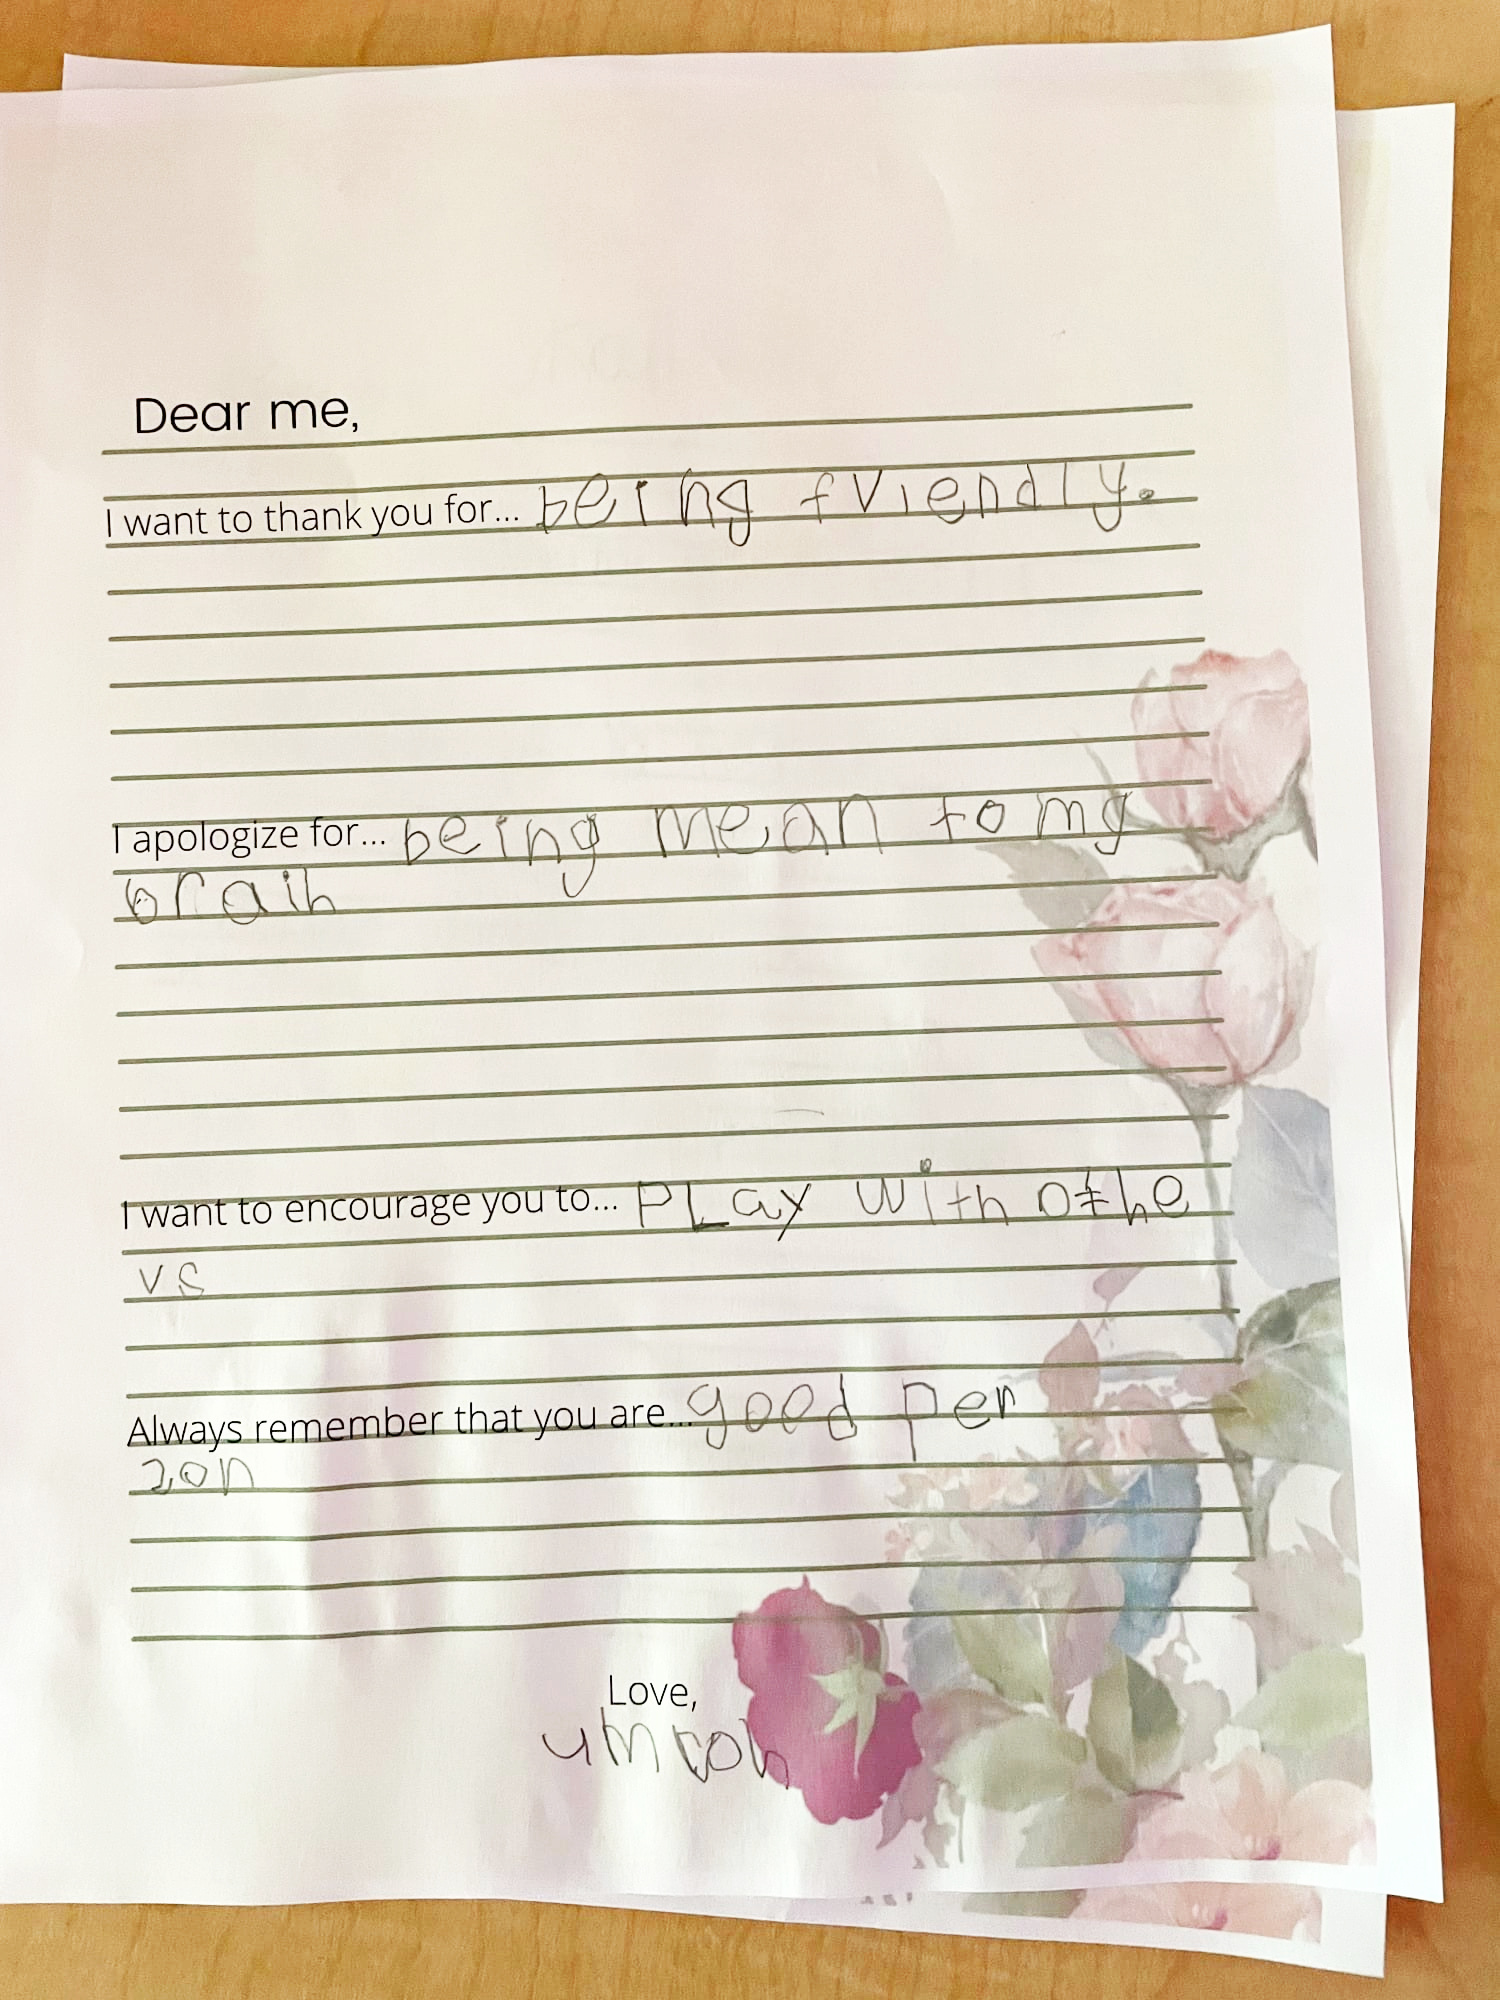 Girl Talk Club Promesa Academy kind letter to yourself